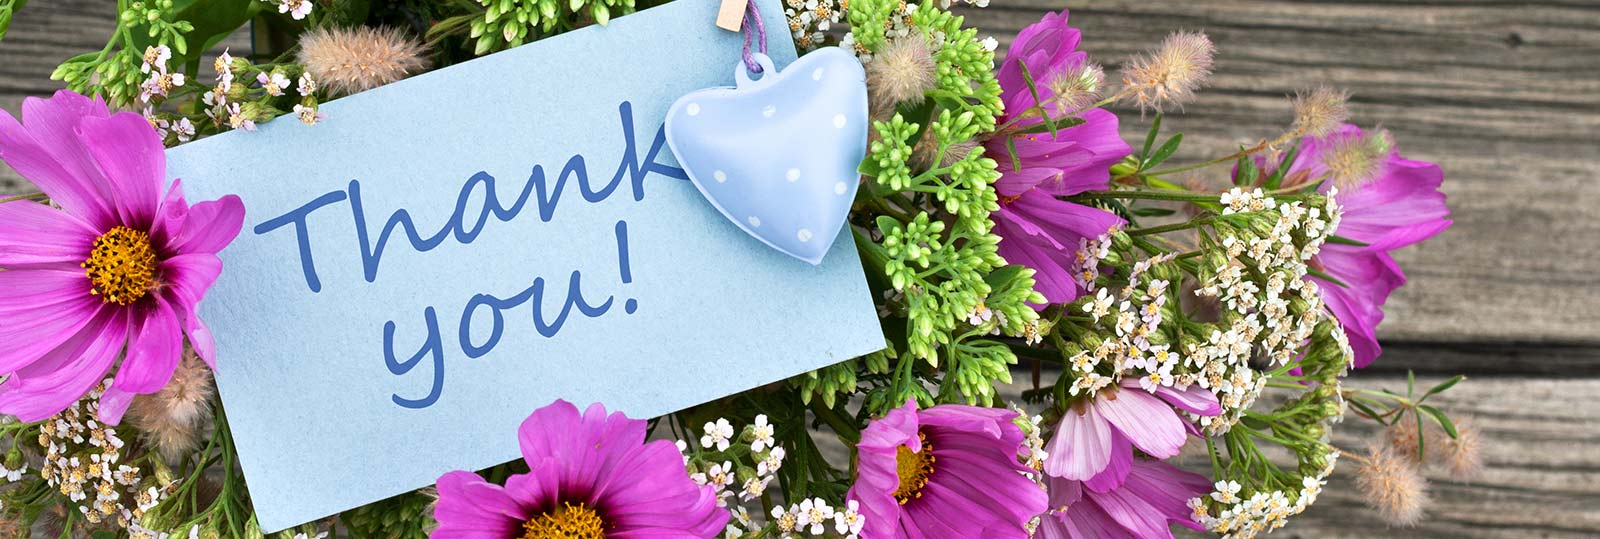 Thank You Gift Delivery – Chicago Floral Designs